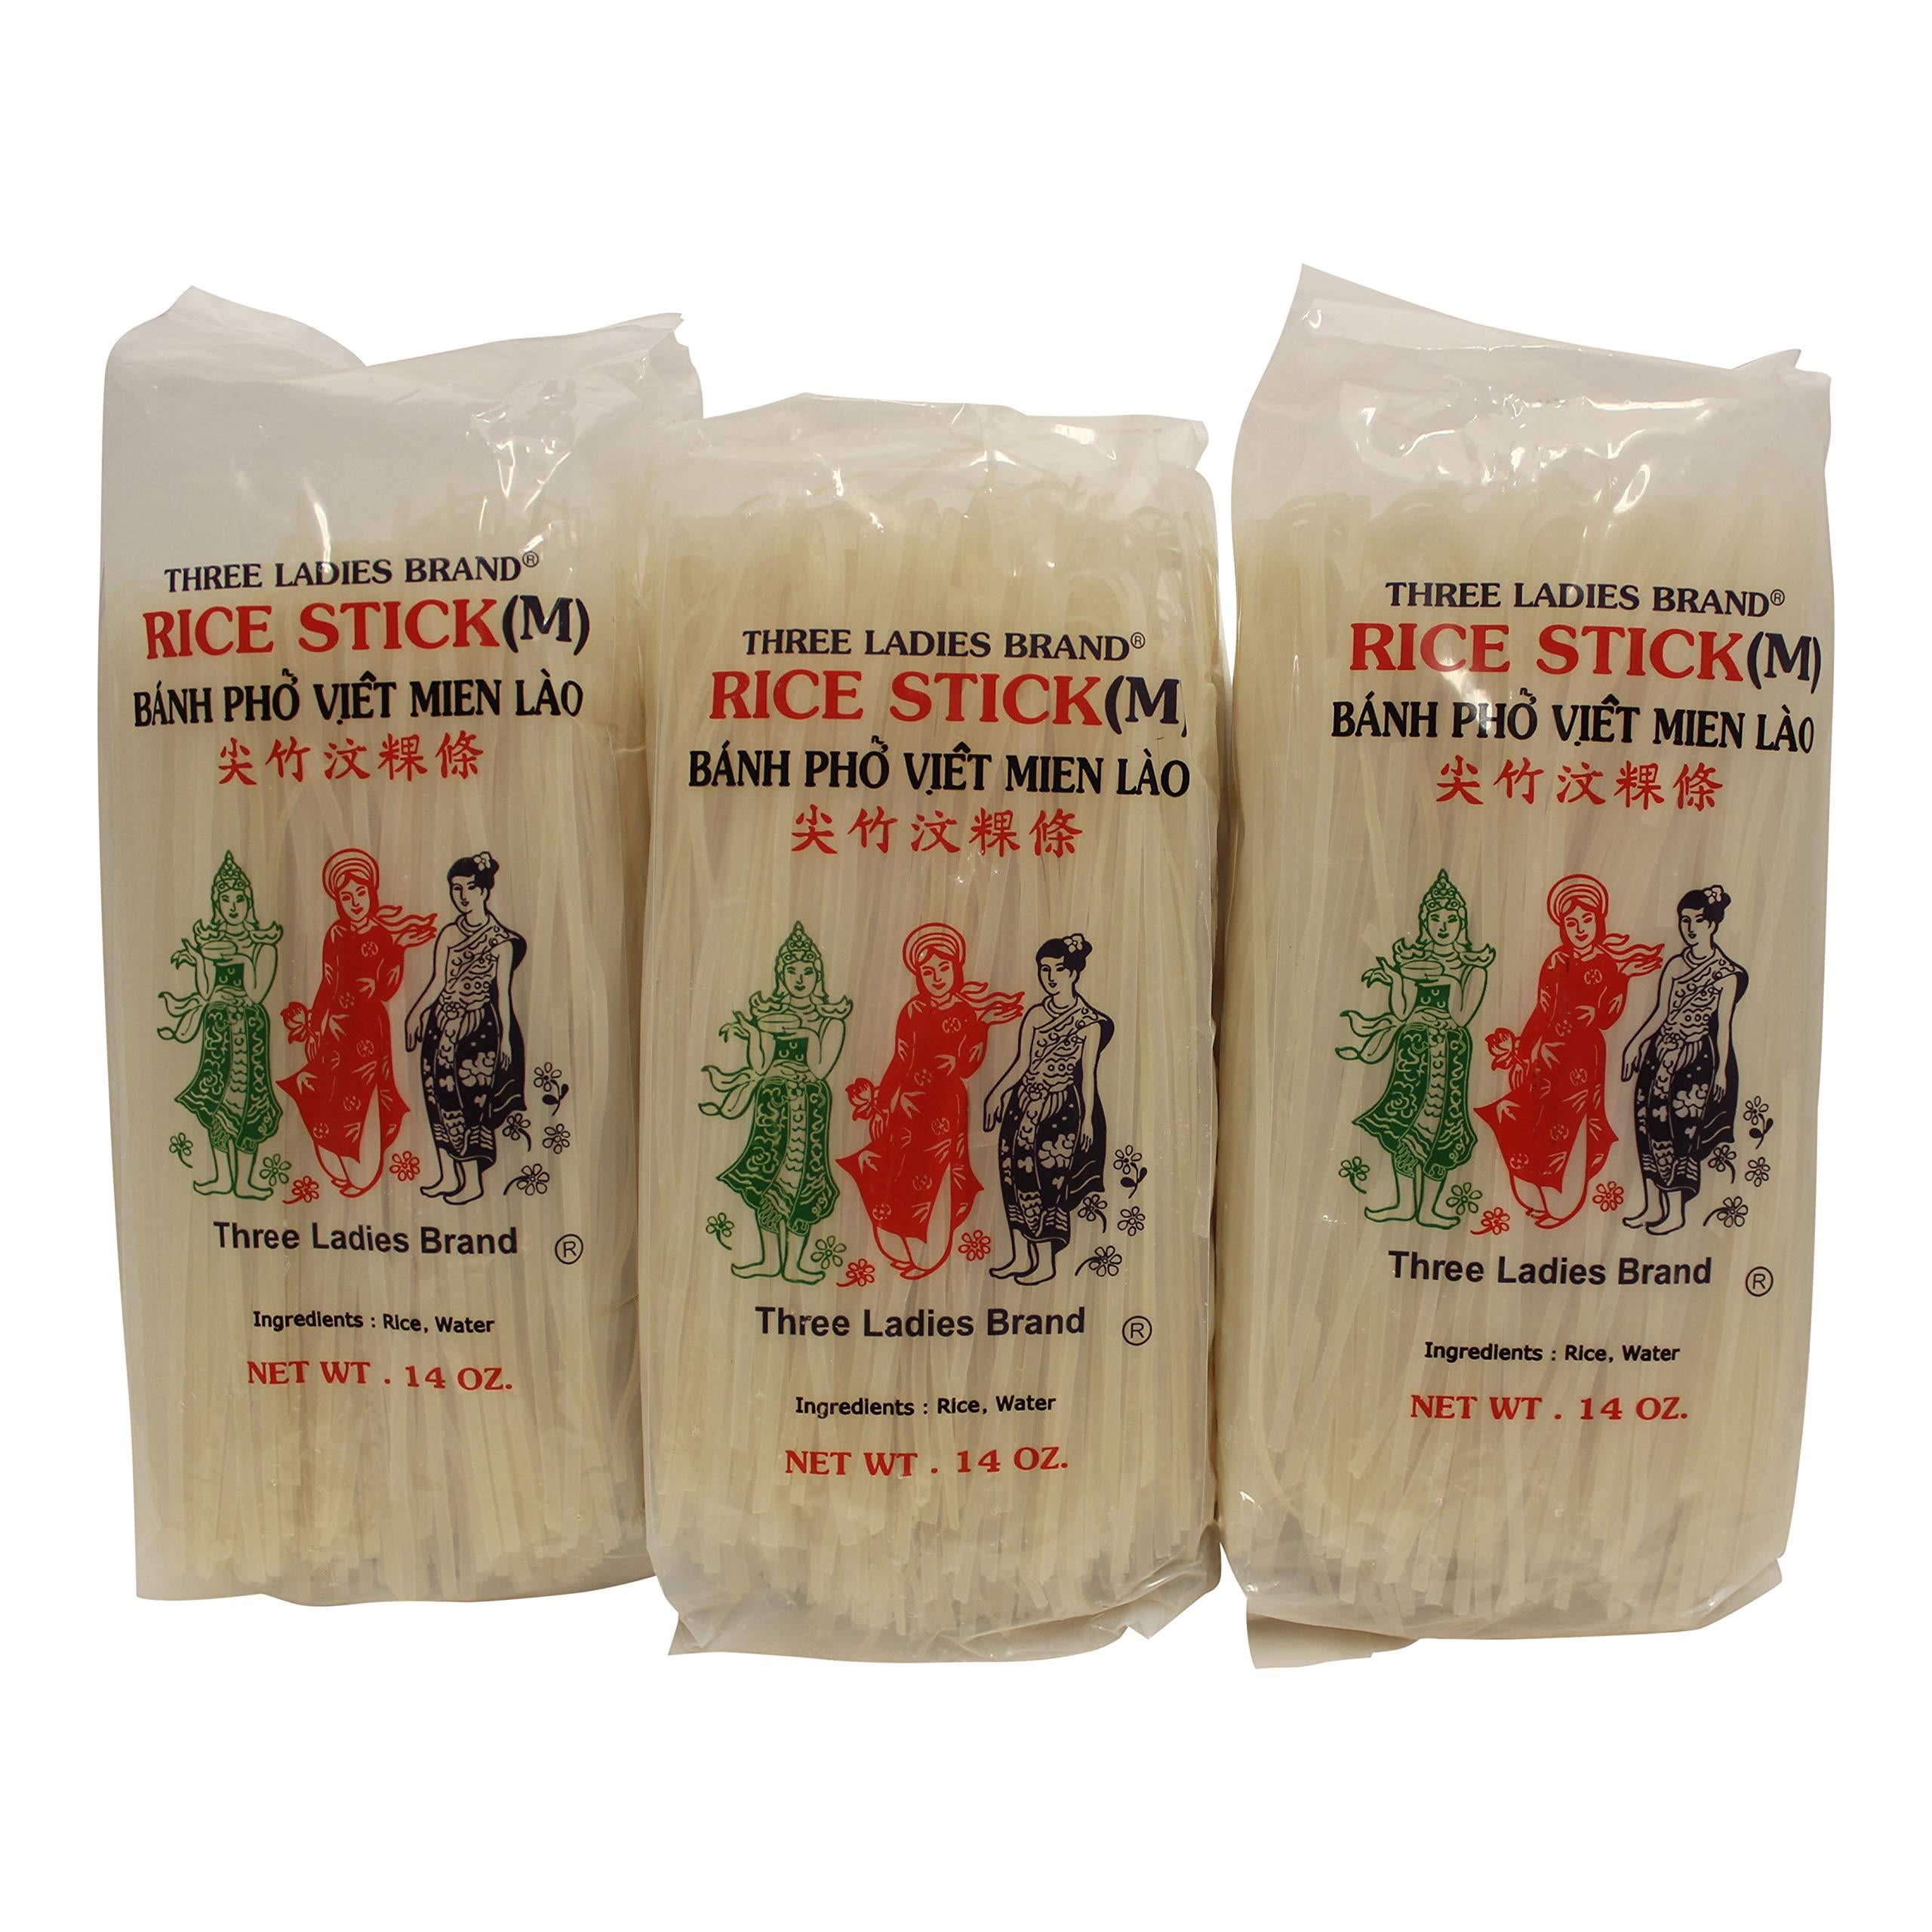 Three Ladies Brand Rice Stick Noodle - 14 Oz. (Pack of 3 Bags)